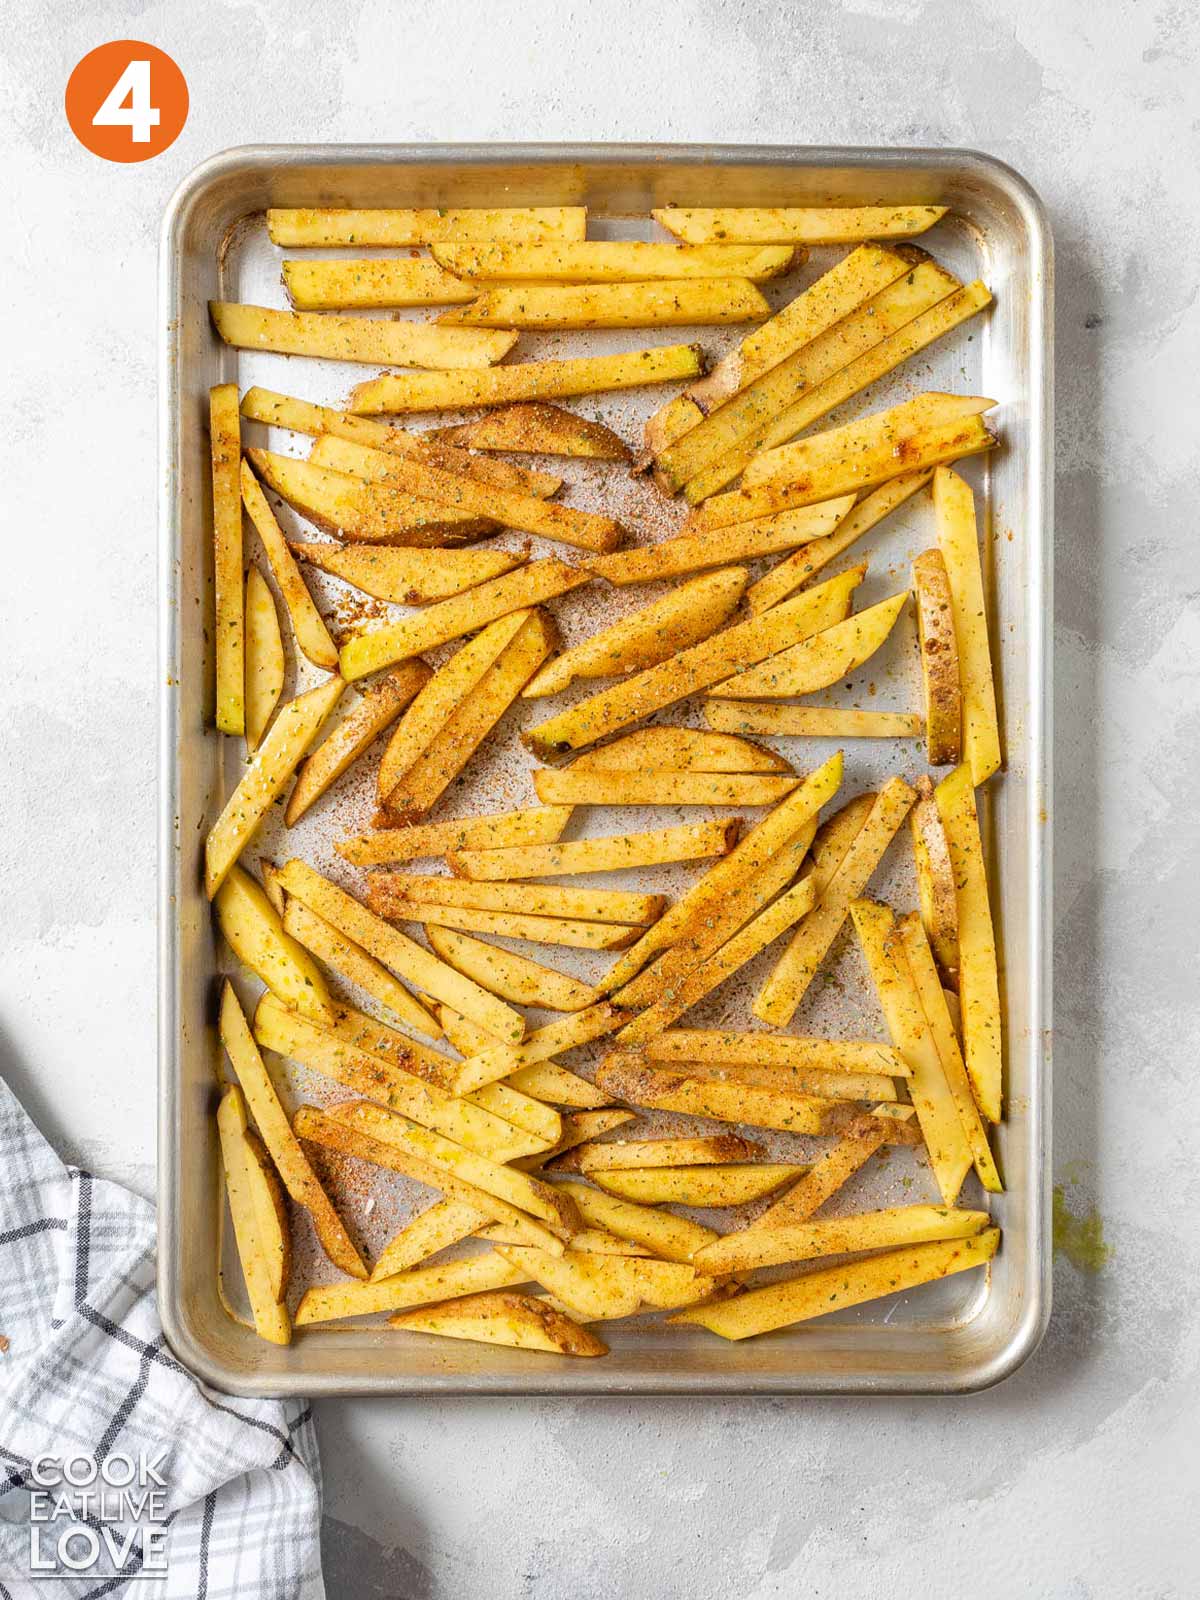 Oven fries on baking sheet with seasoning added on top.